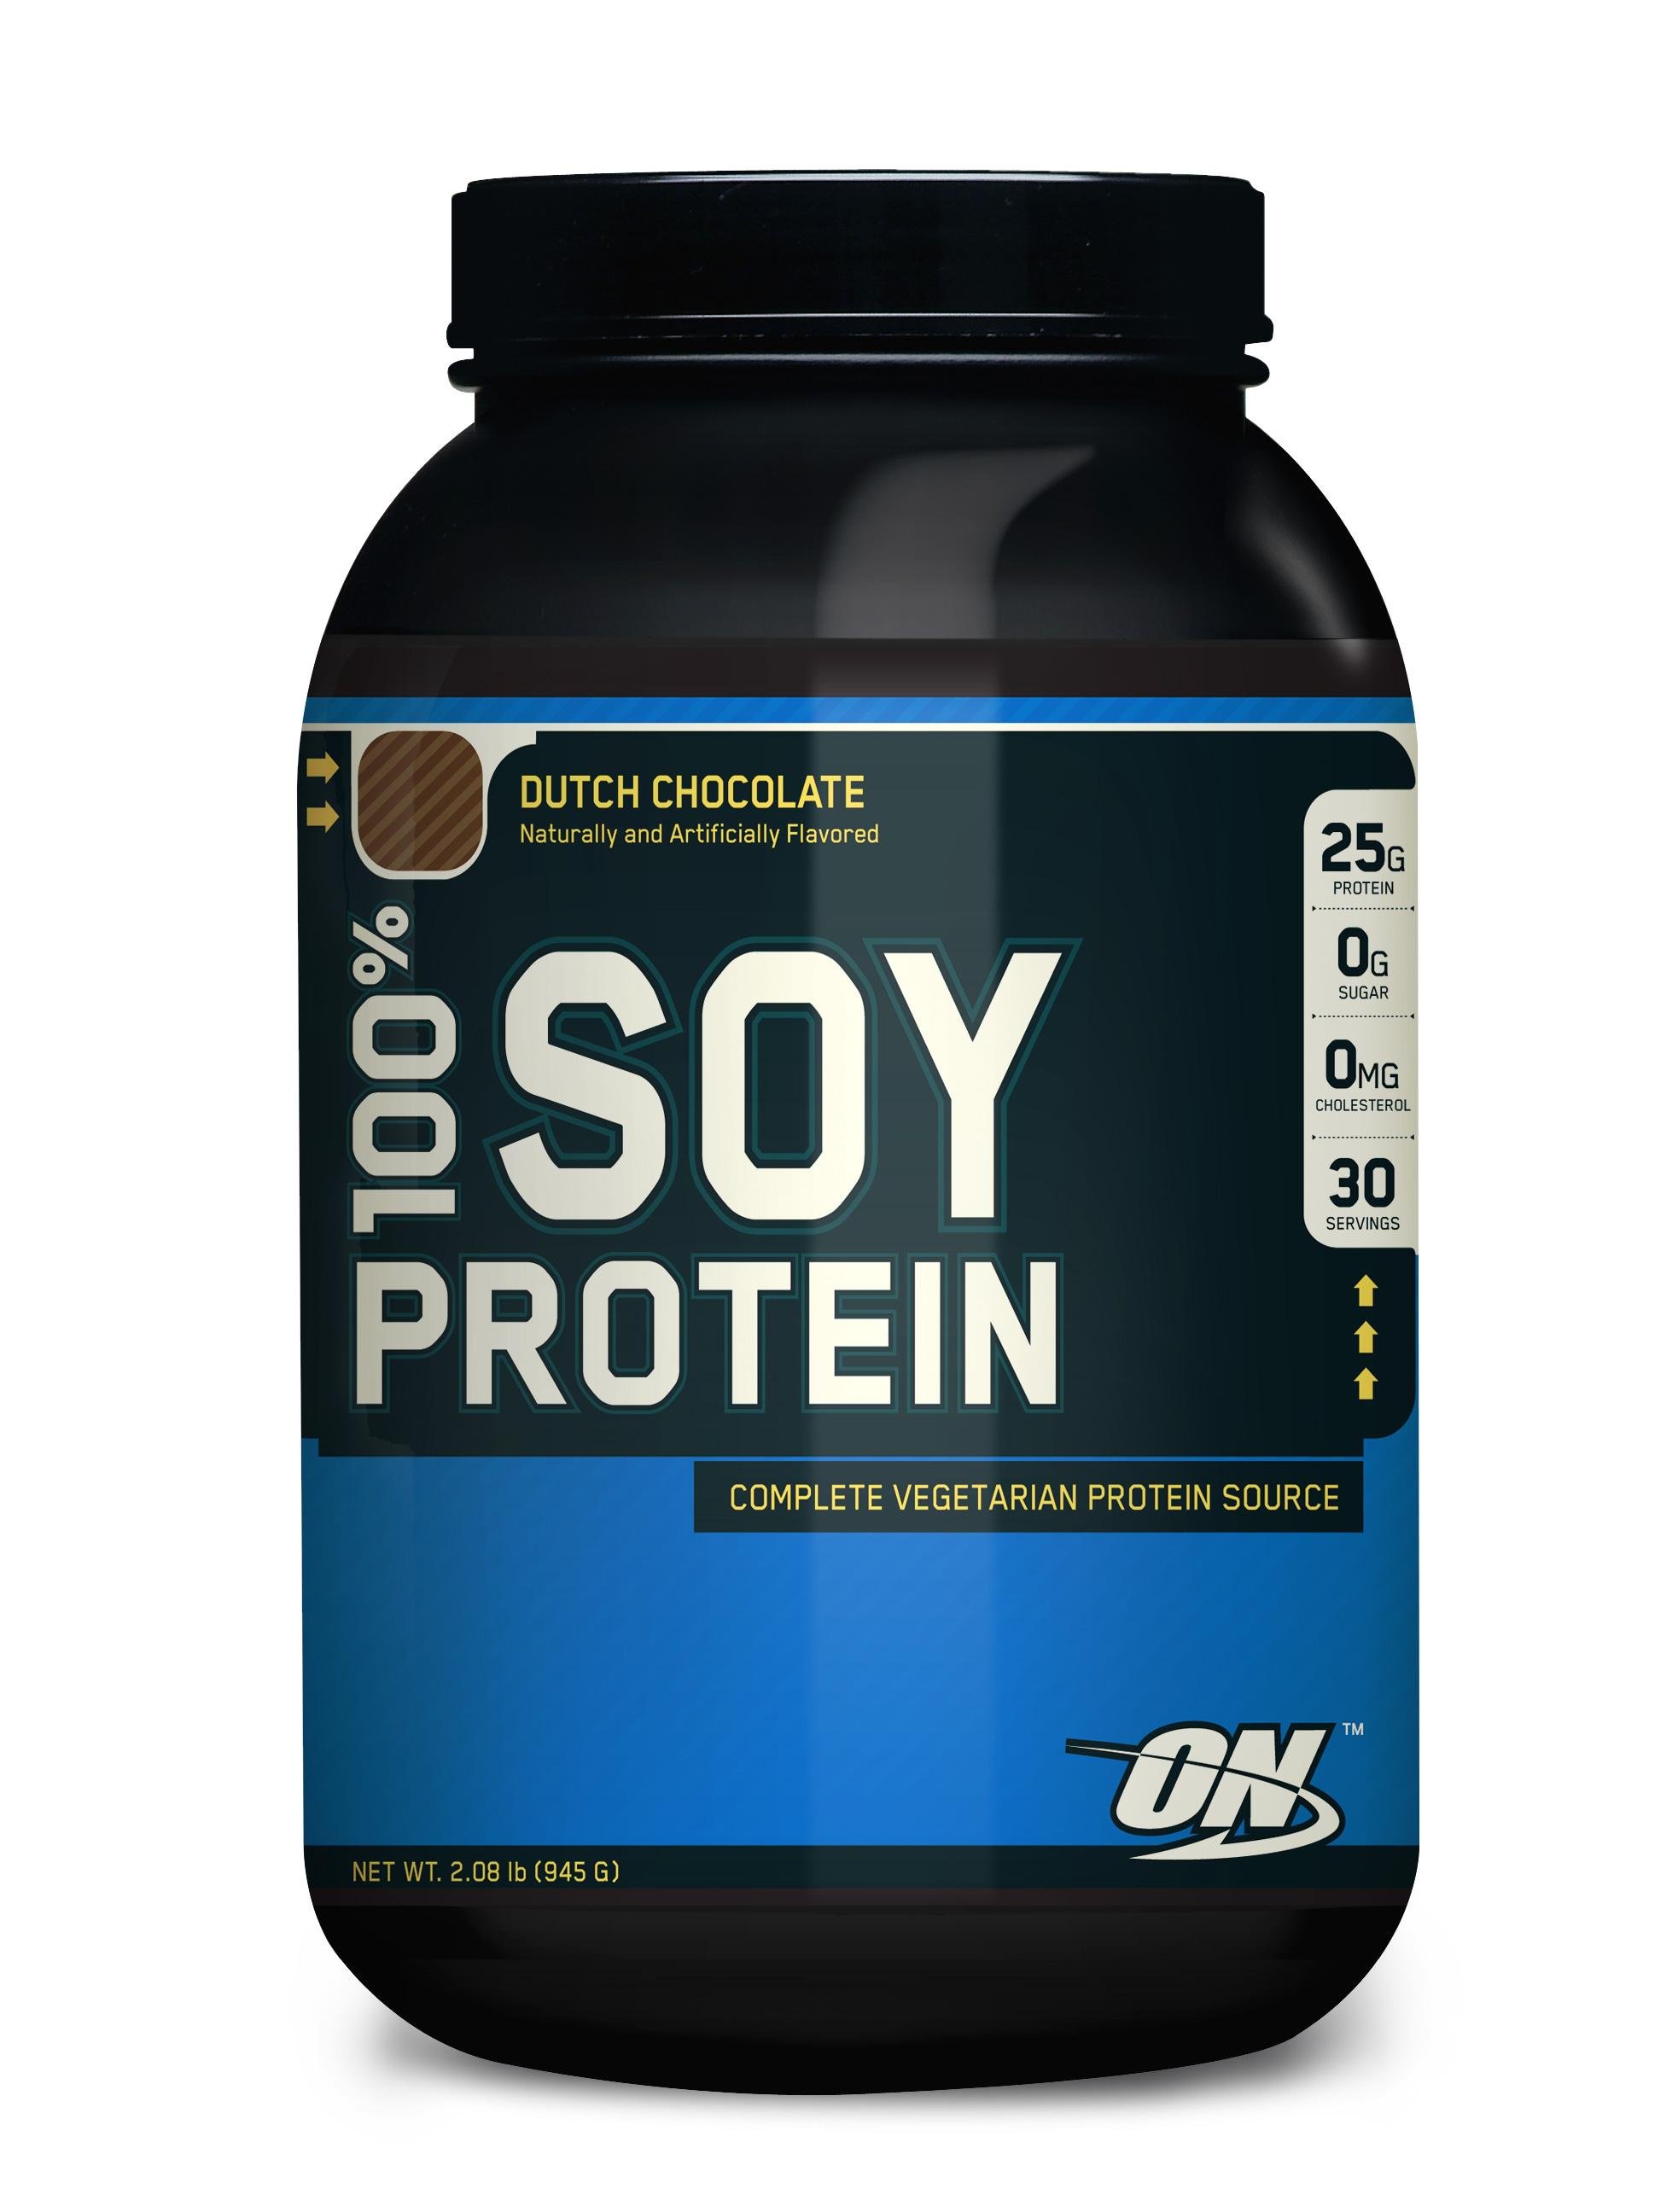 100% Soy Protein, 915 g, Optimum Nutrition. Soy protein. 